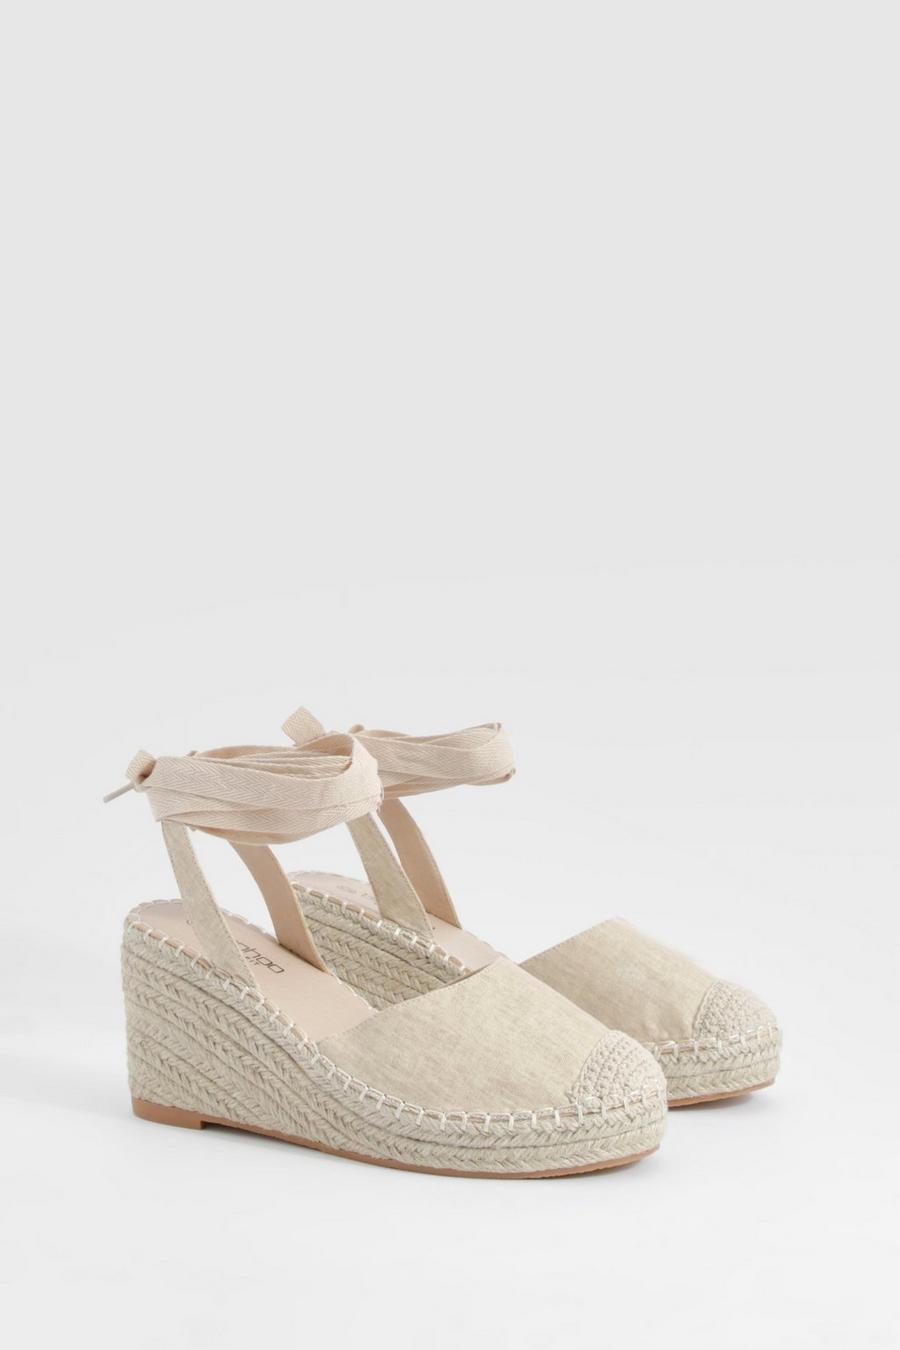 Beige Wide Fit Closed Toe Mid Height Wedges